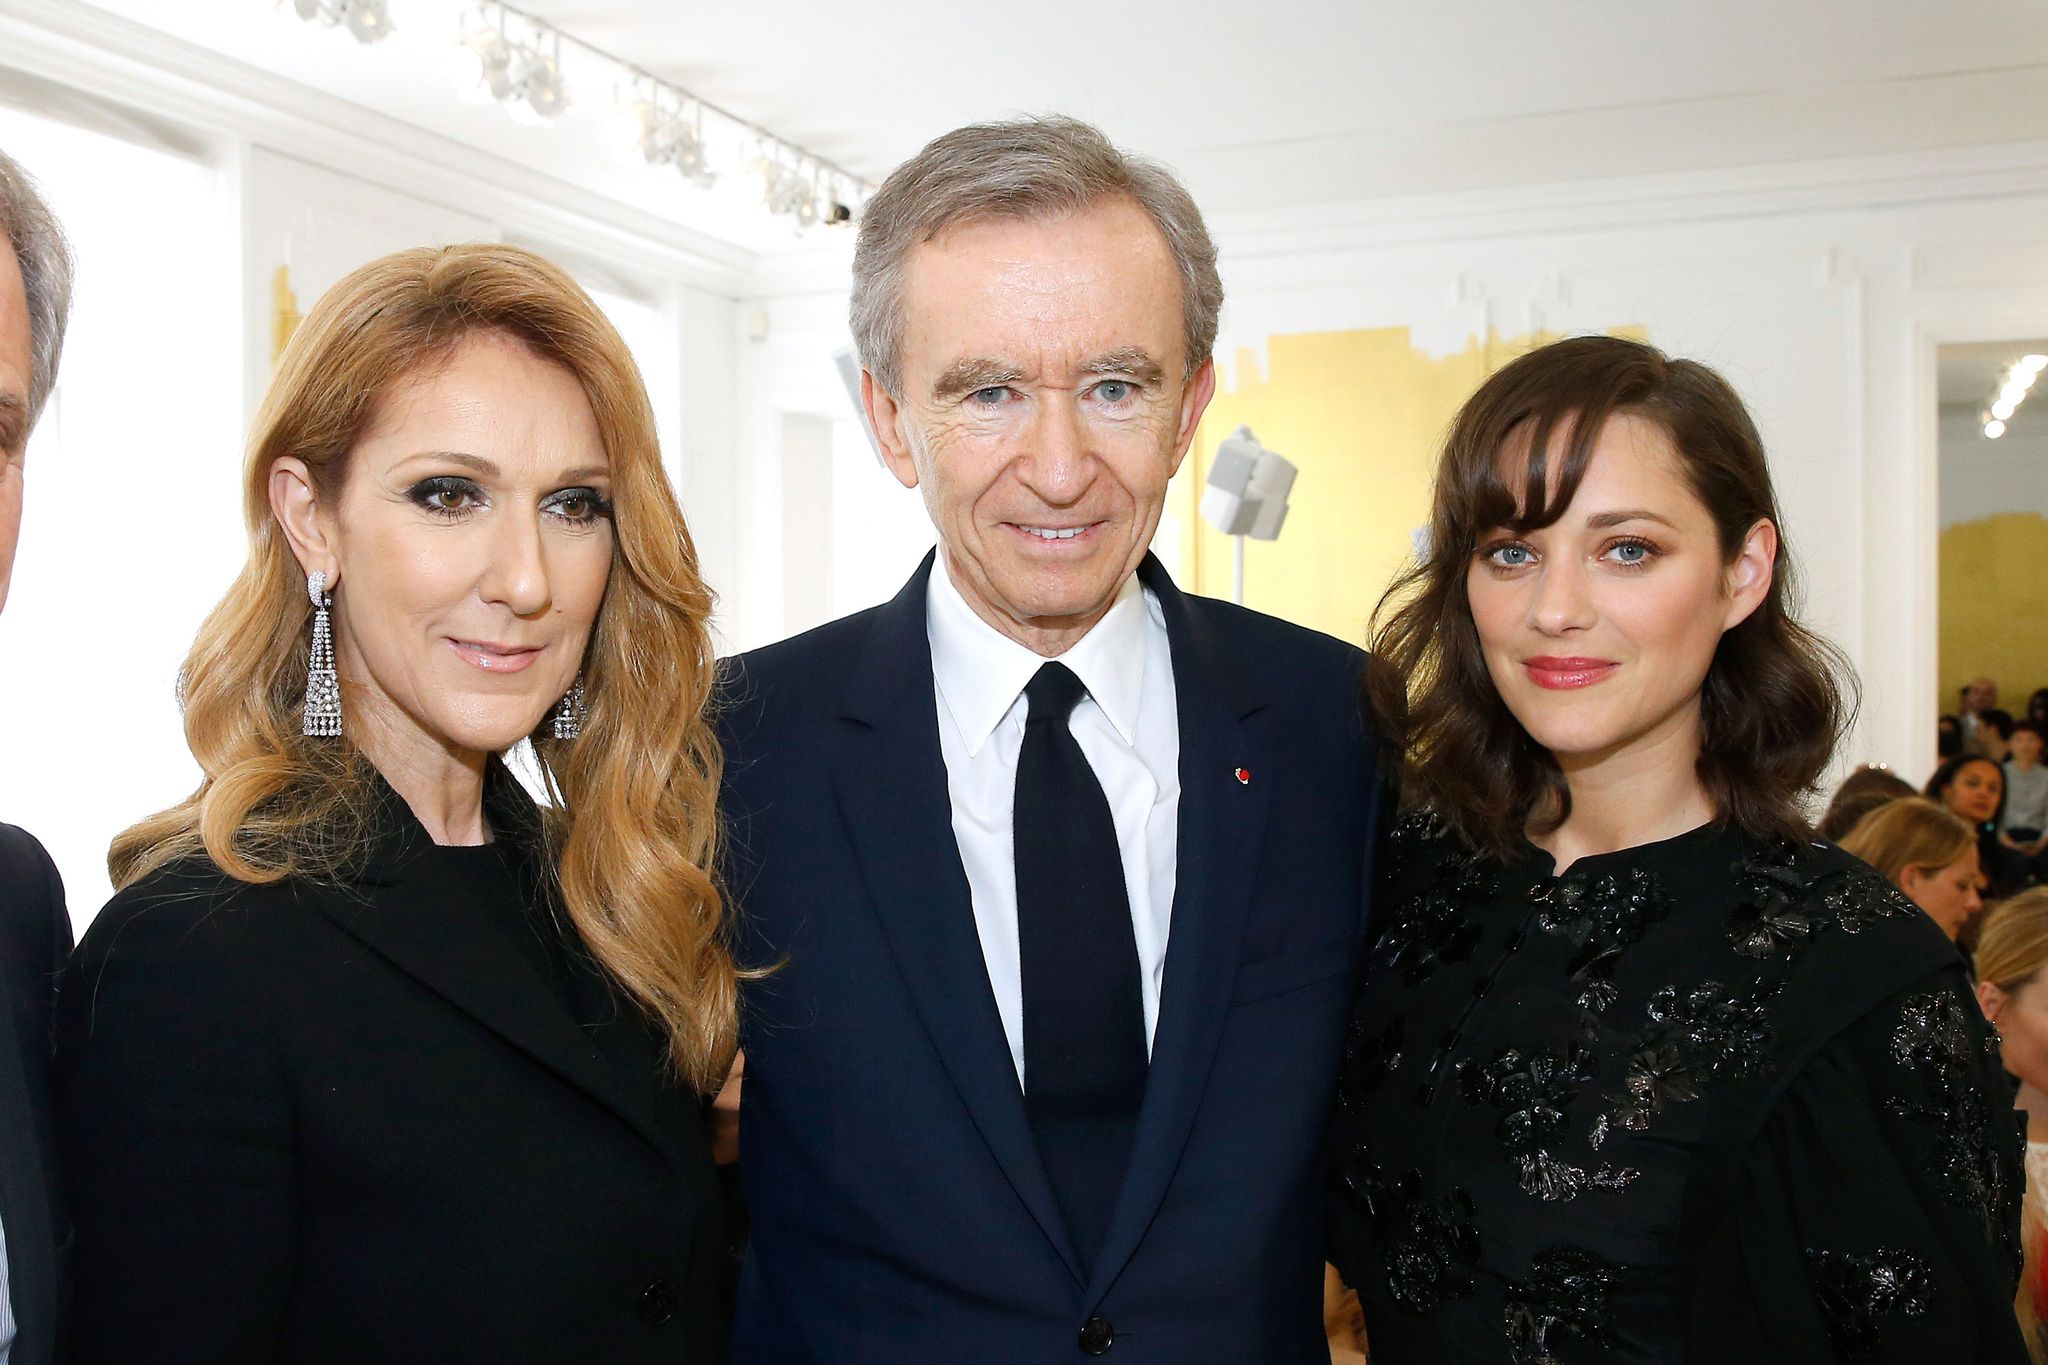 Bernard Arnault crowned the world's richest person in 2023